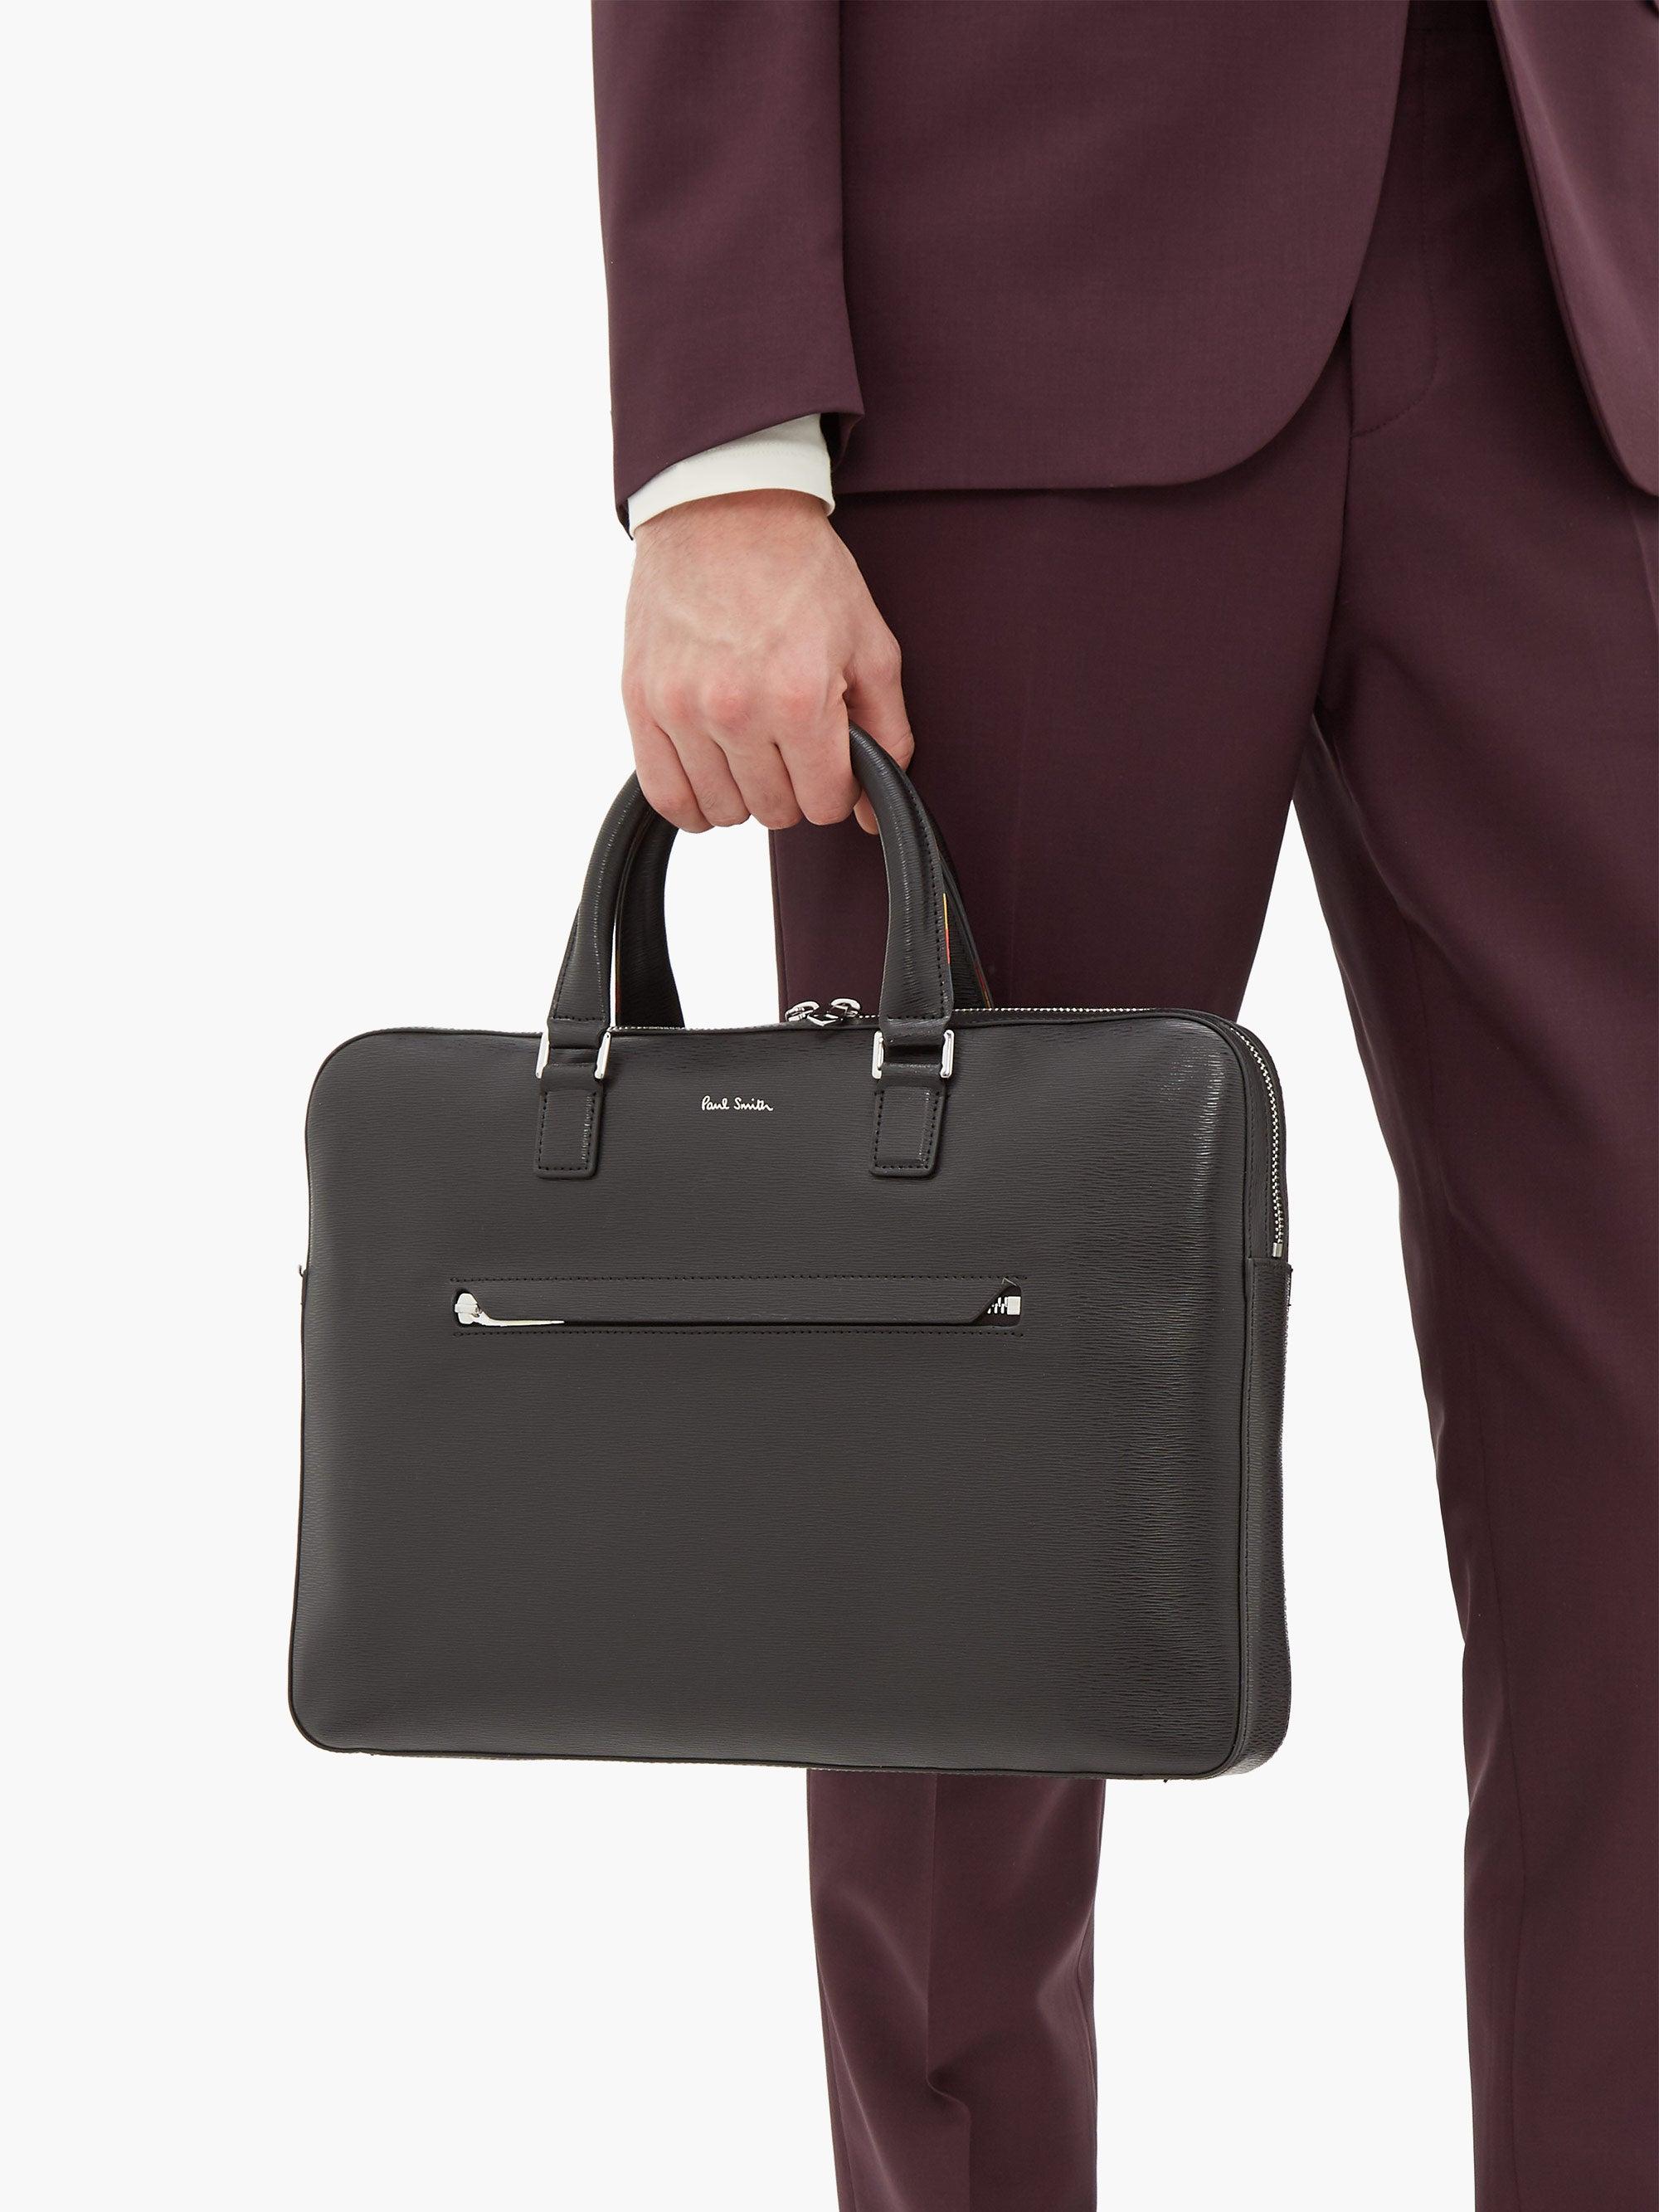 Paul Smith Leather Briefcase in Black for Men - Lyst